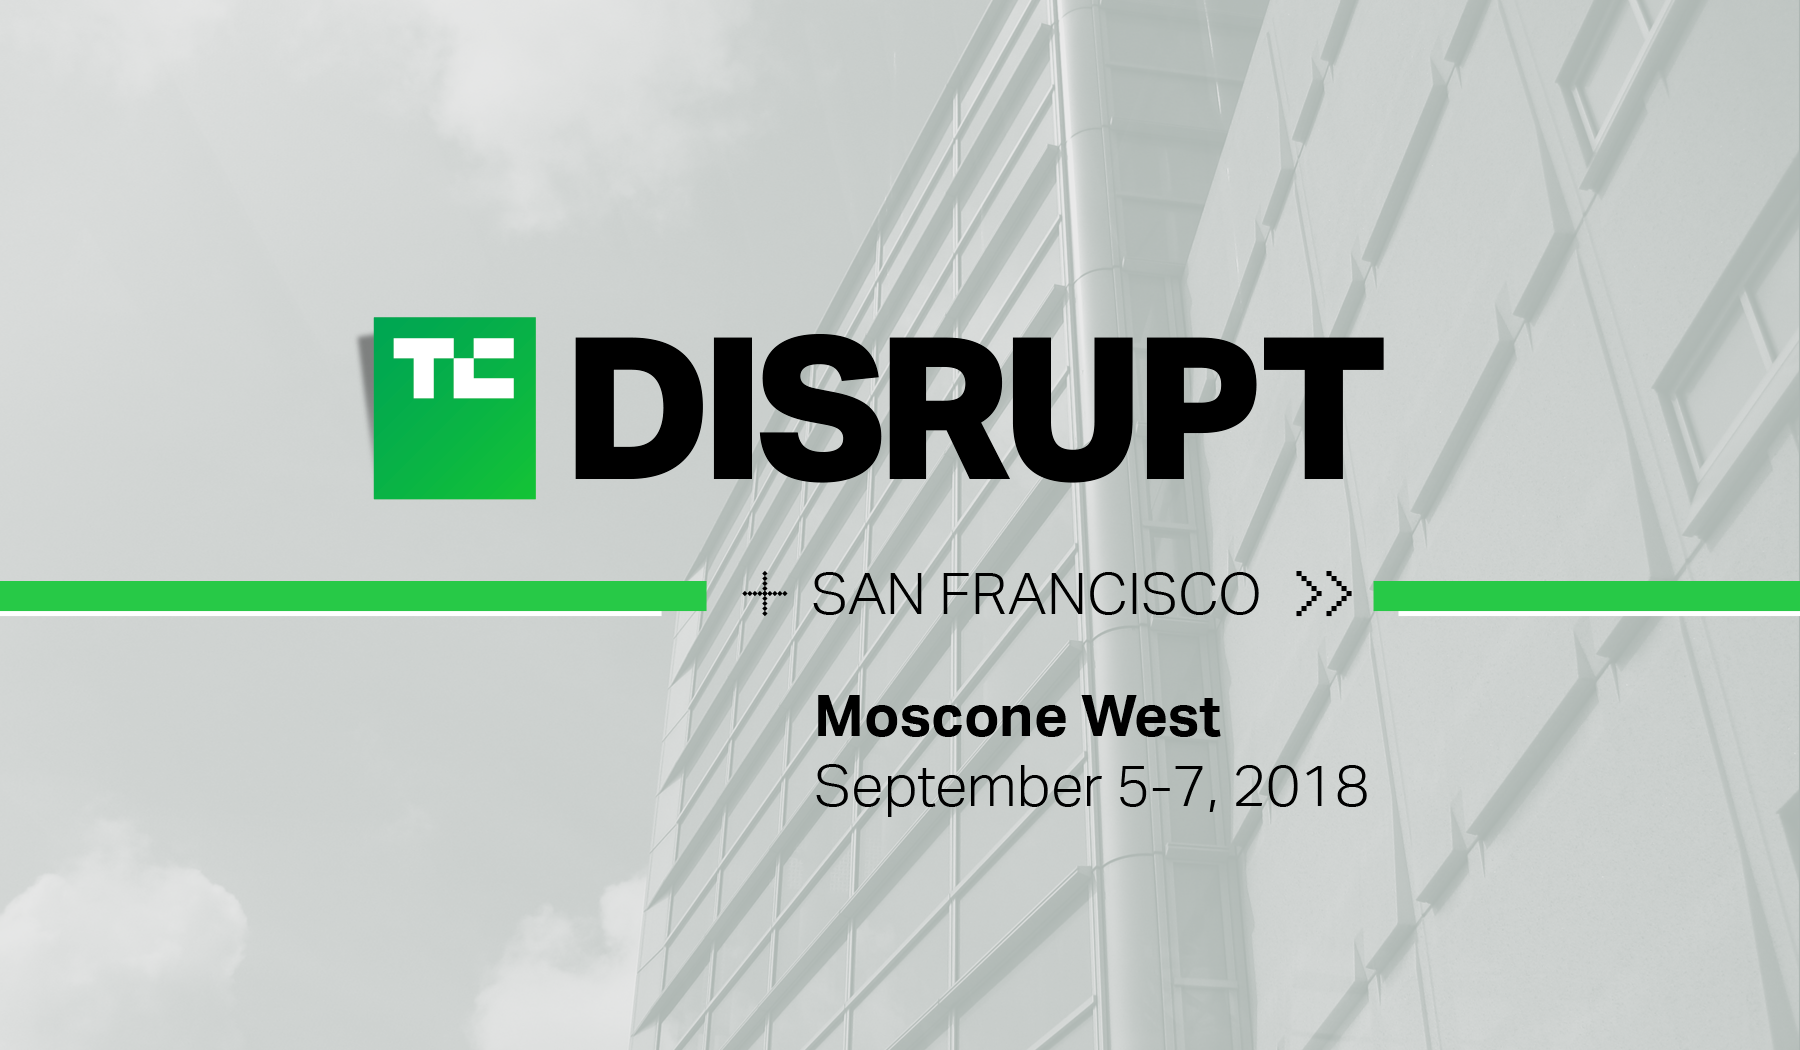 TechCrunch is scaling up Disrupt SF with a move to Moscone West in September 2018 | TechCrunch